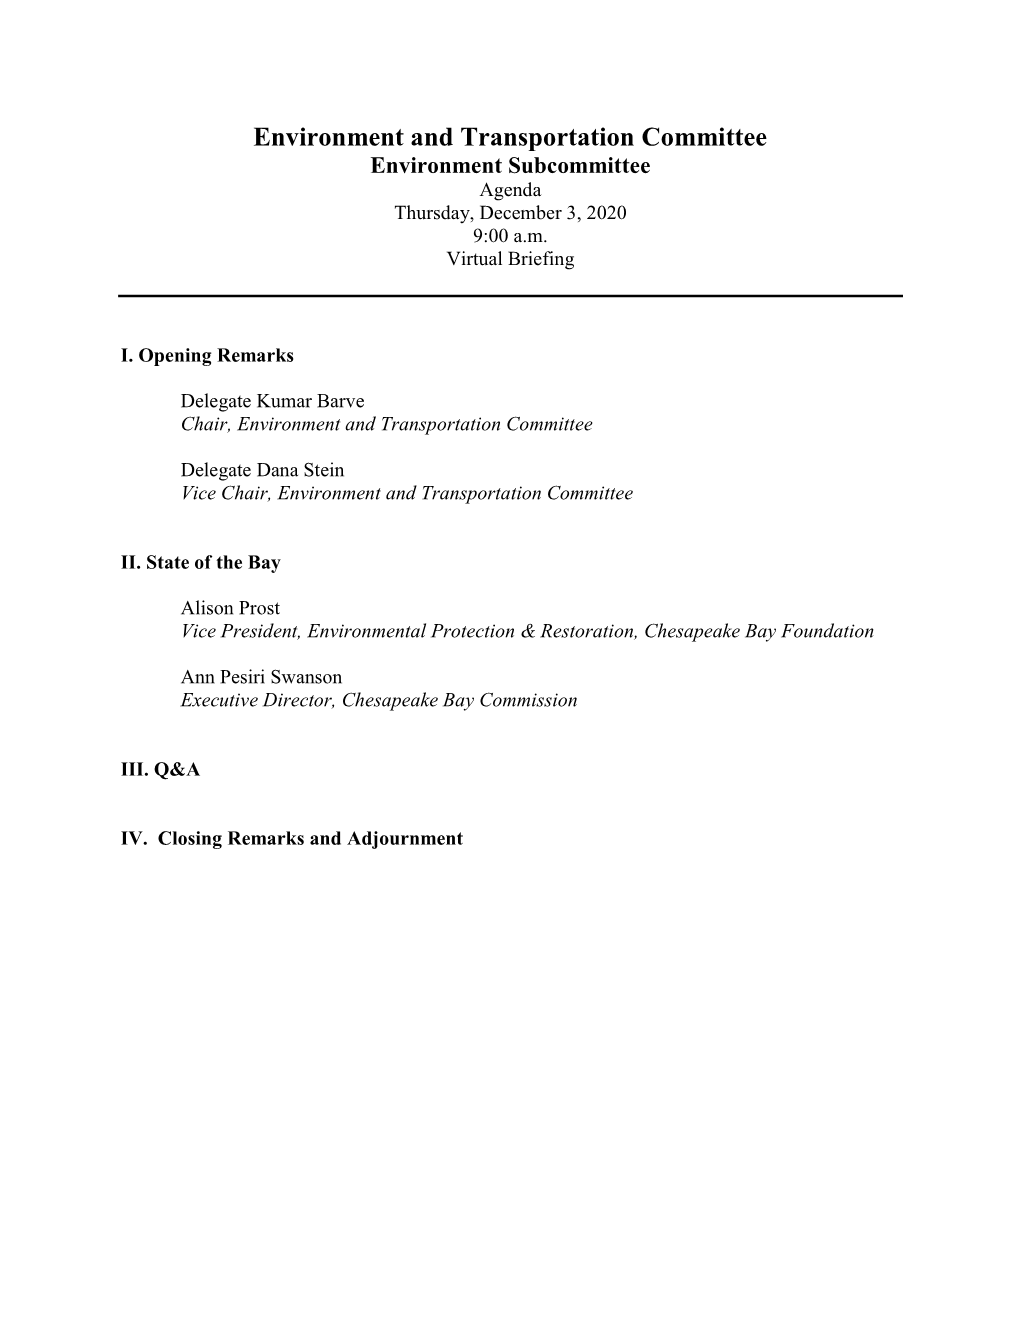 Environment and Transportation Committee Environment Subcommittee Agenda Thursday, December 3, 2020 9:00 A.M